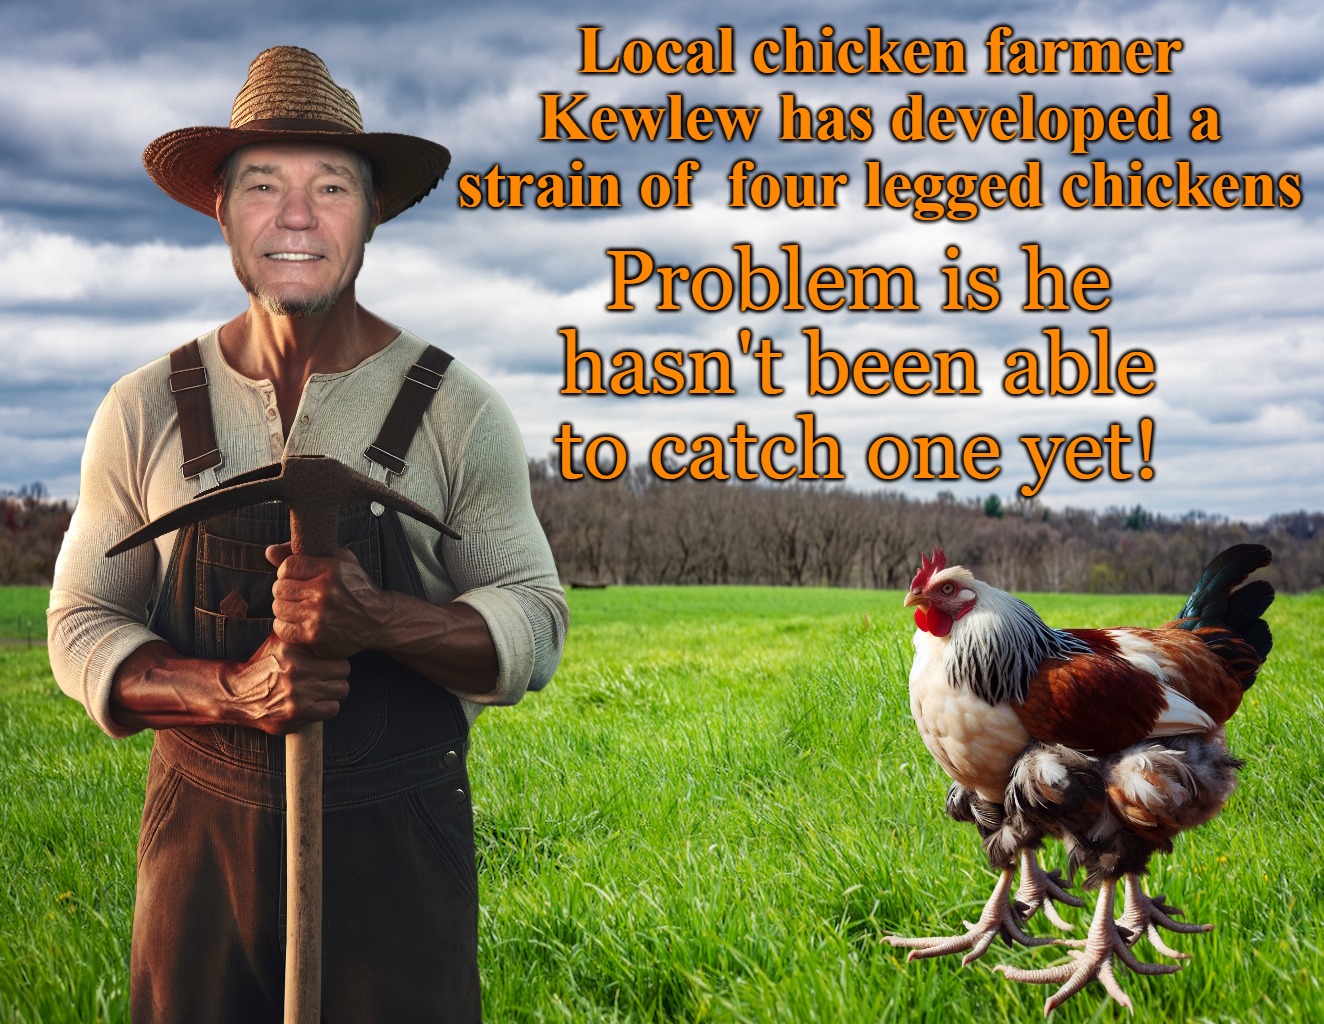 New strain of 4 legged chickens | Local chicken farmer Kewlew has developed a strain of  four legged chickens; Problem is he hasn't been able to catch one yet! | image tagged in 4 legged chickens,kewlew | made w/ Imgflip meme maker